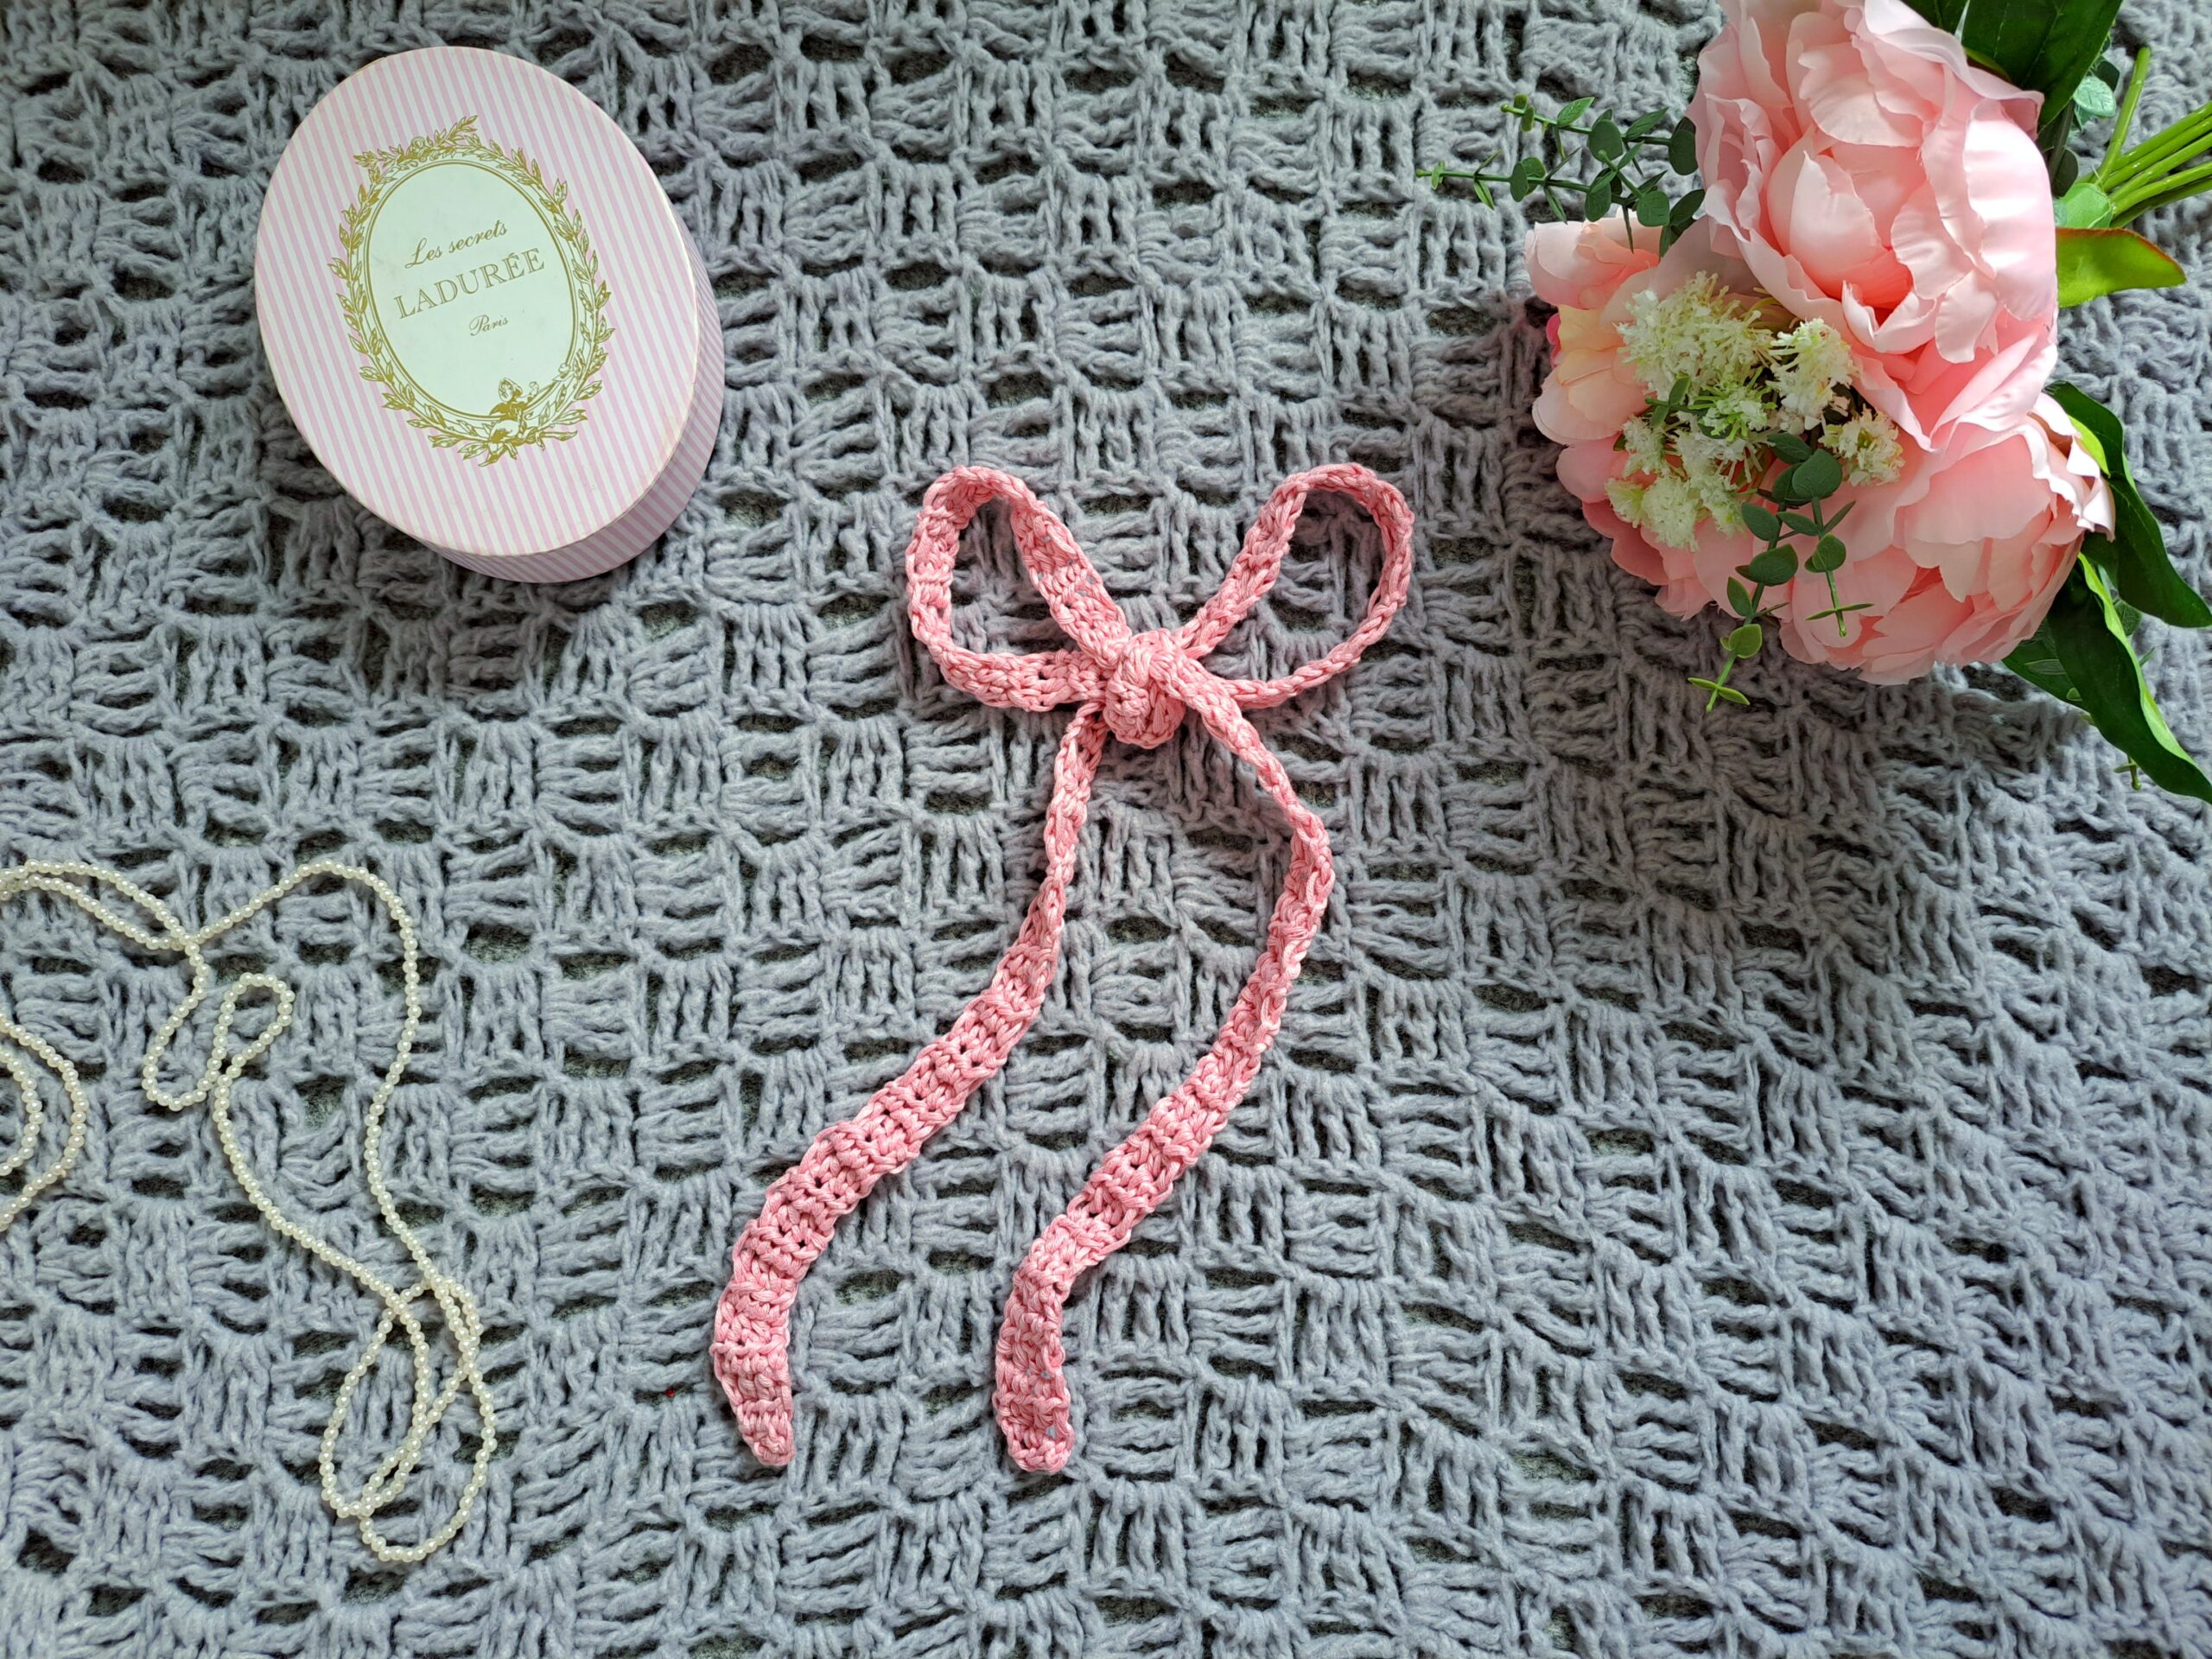 Pin on The Crochet Channel